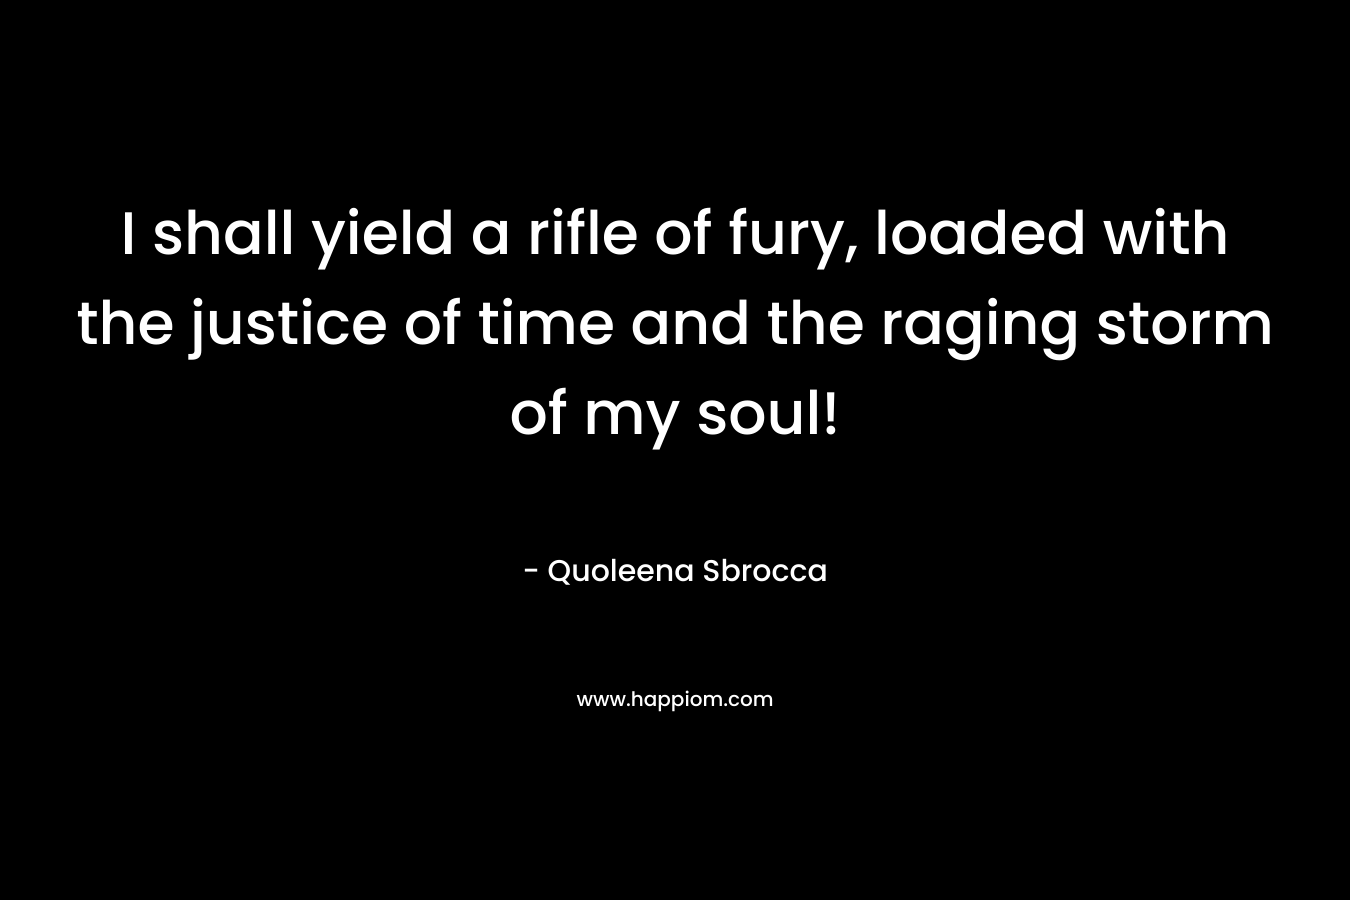 I shall yield a rifle of fury, loaded with the justice of time and the raging storm of my soul! – Quoleena Sbrocca